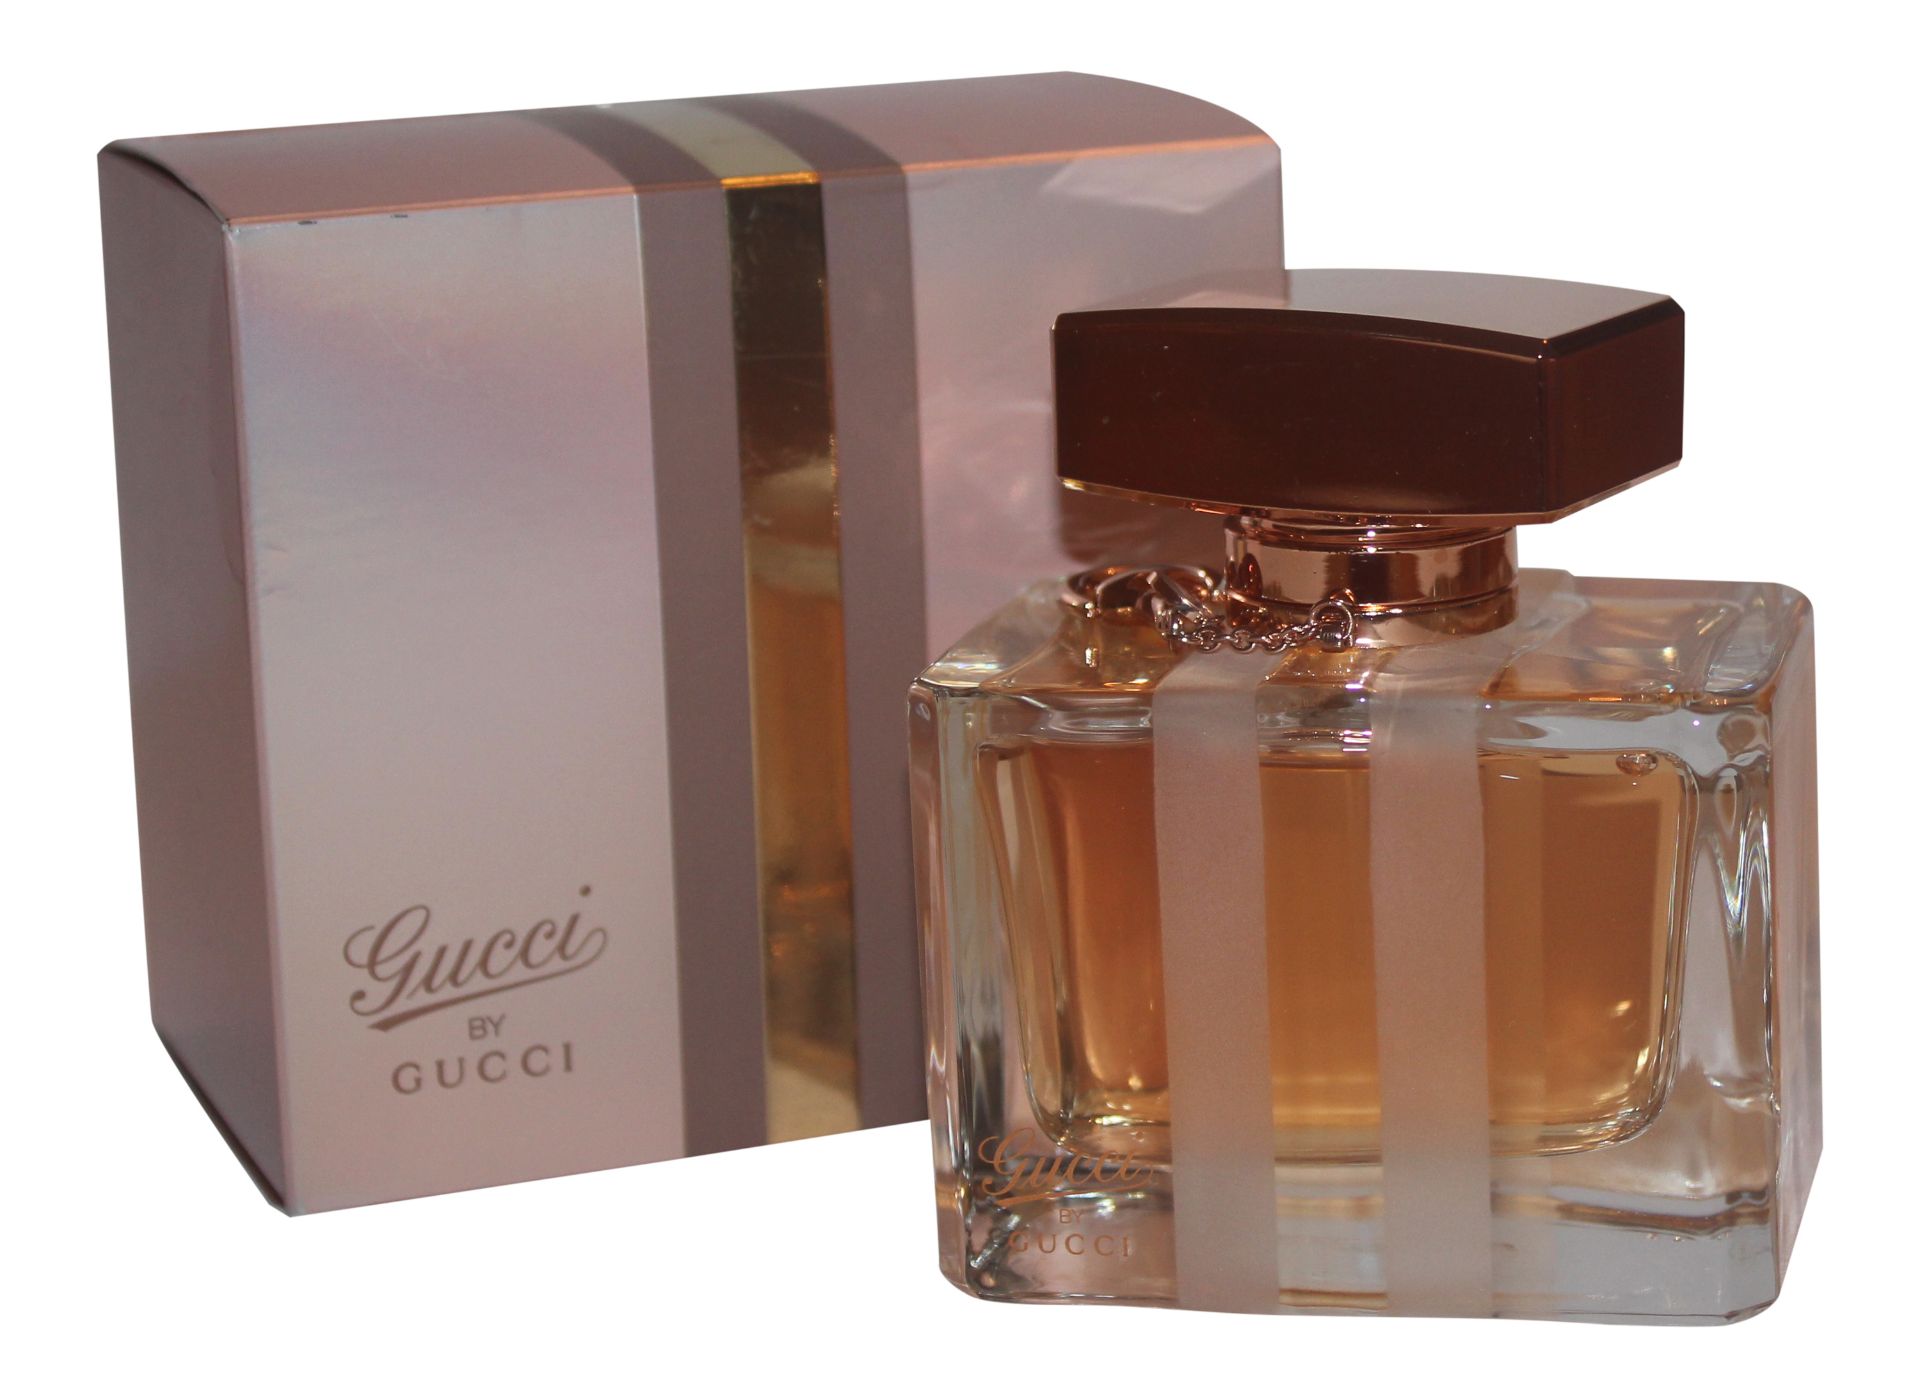 Gucci by Gucci EDT 75ml Women (Brand New Purfume but box slightly damaged) x 1 Unit - Image 3 of 3